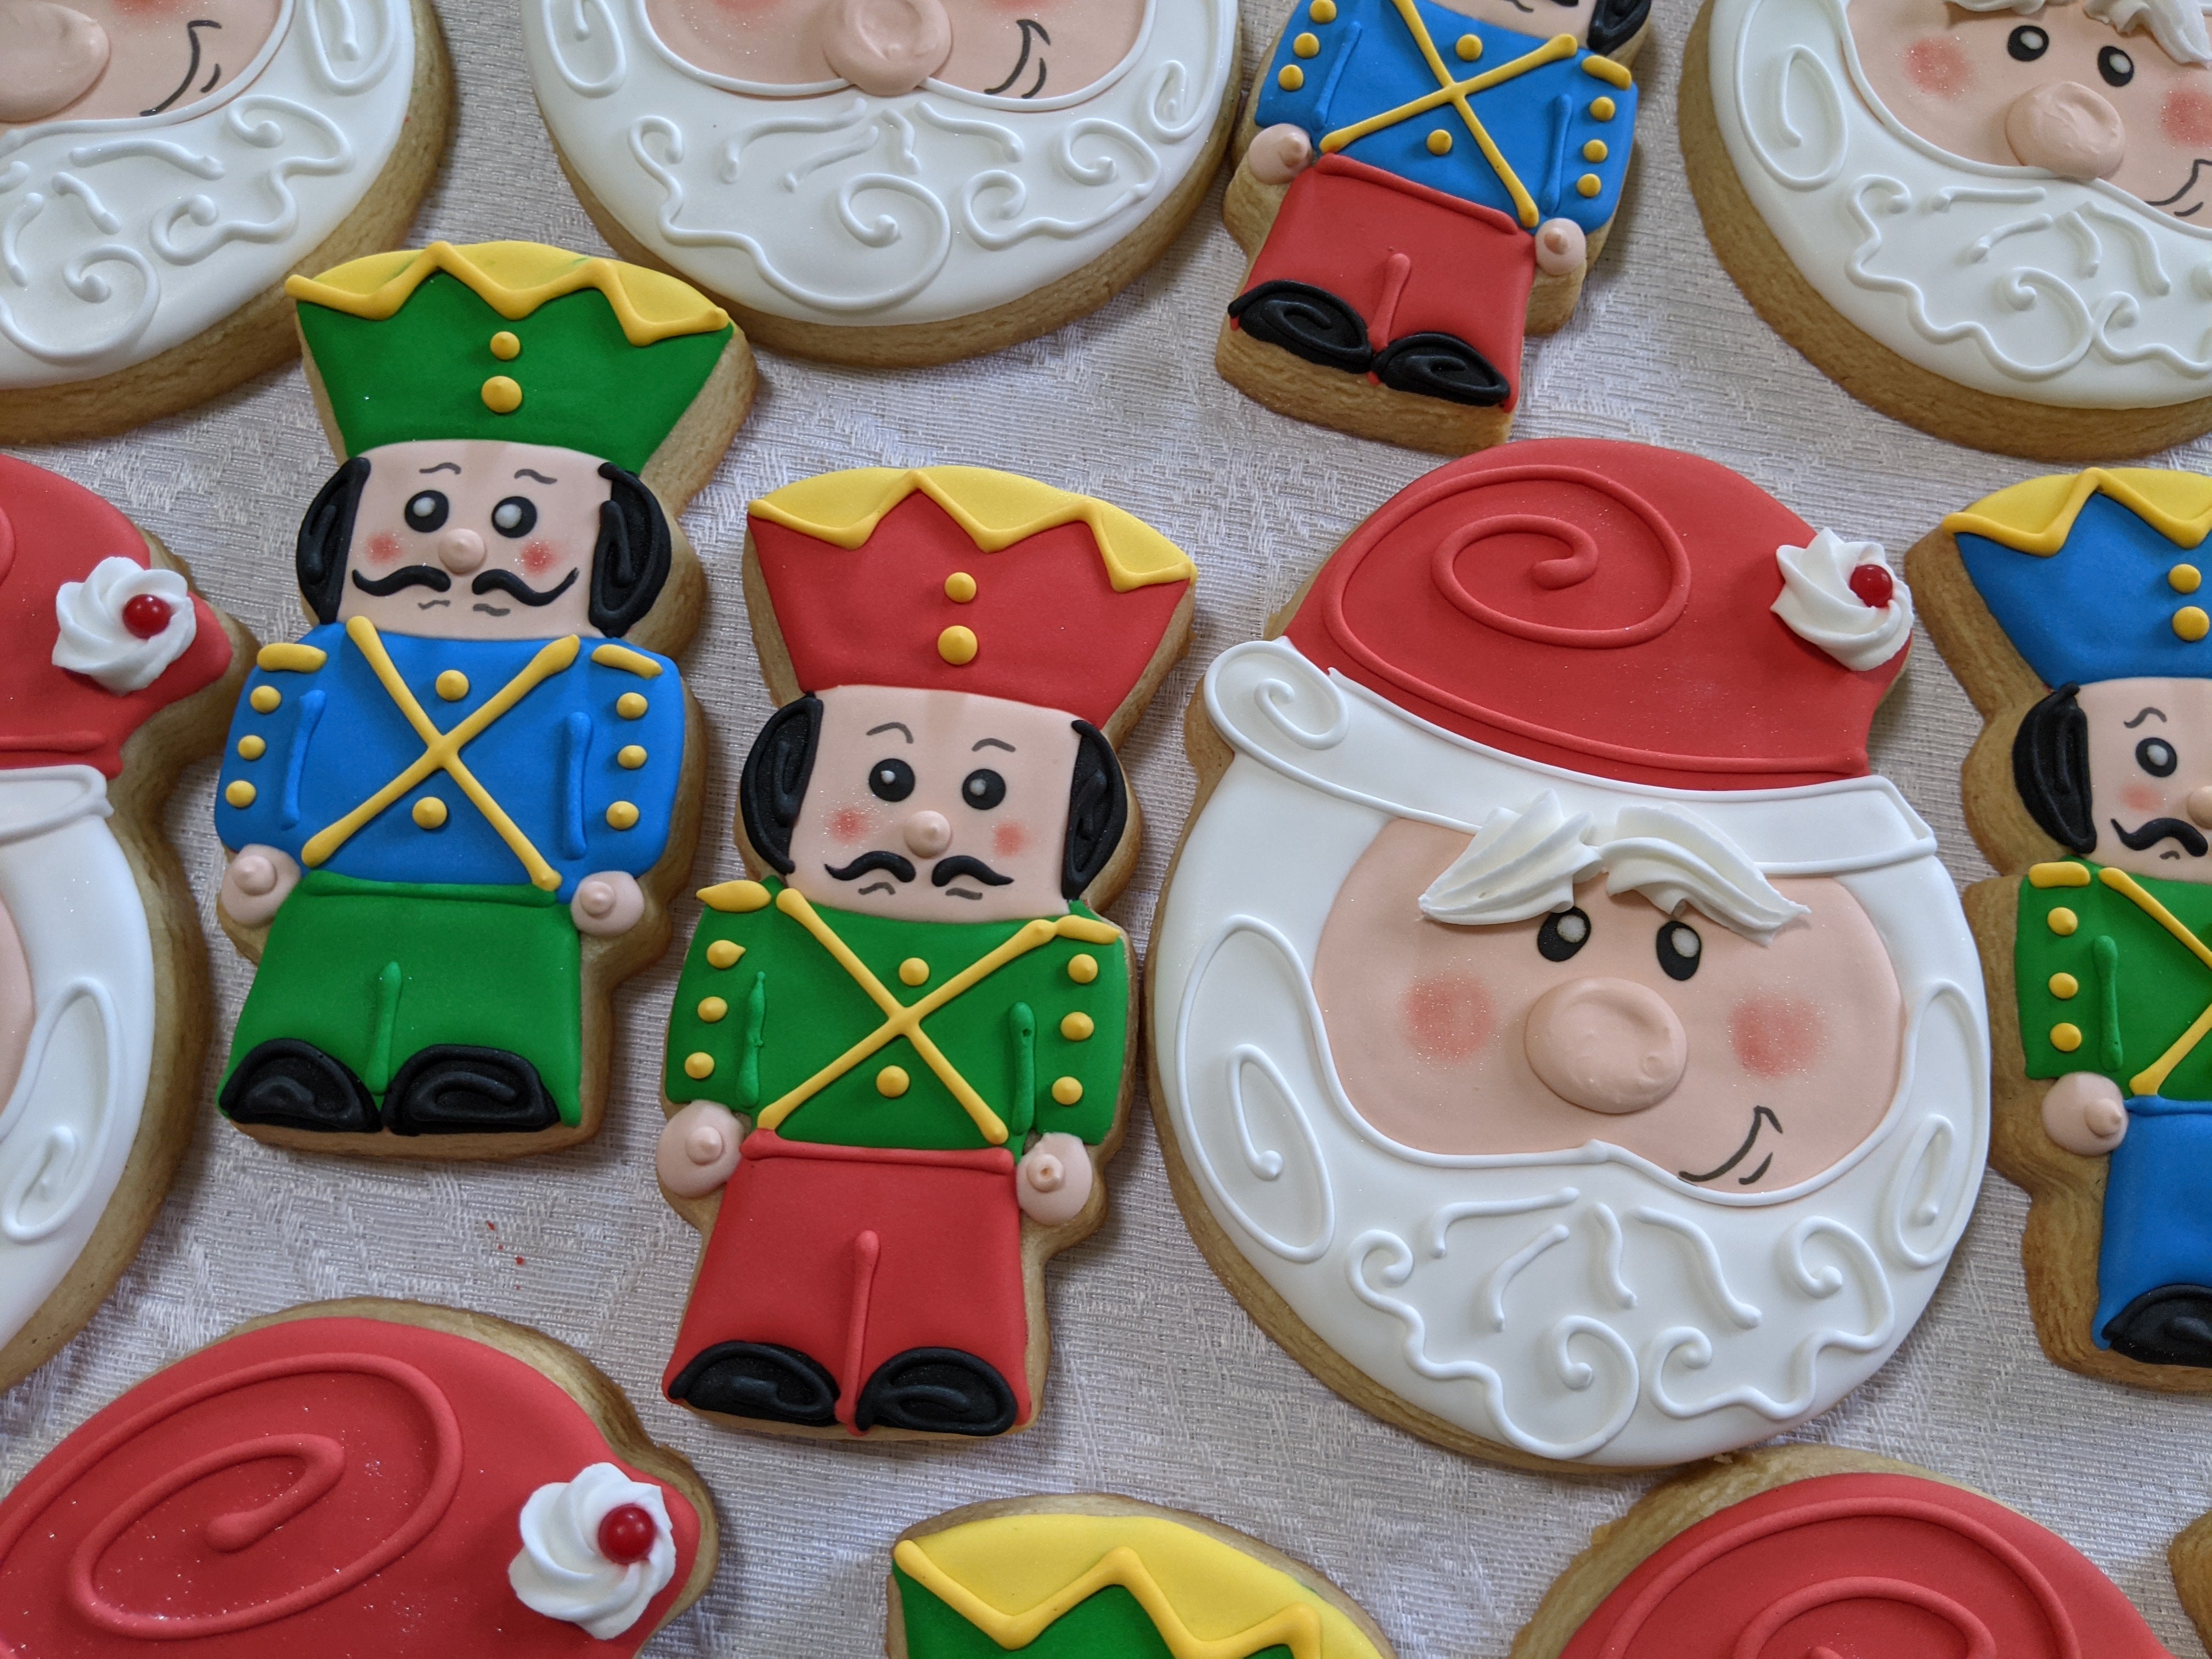 Santa Claus and Nutcracker 24 decorated cookies